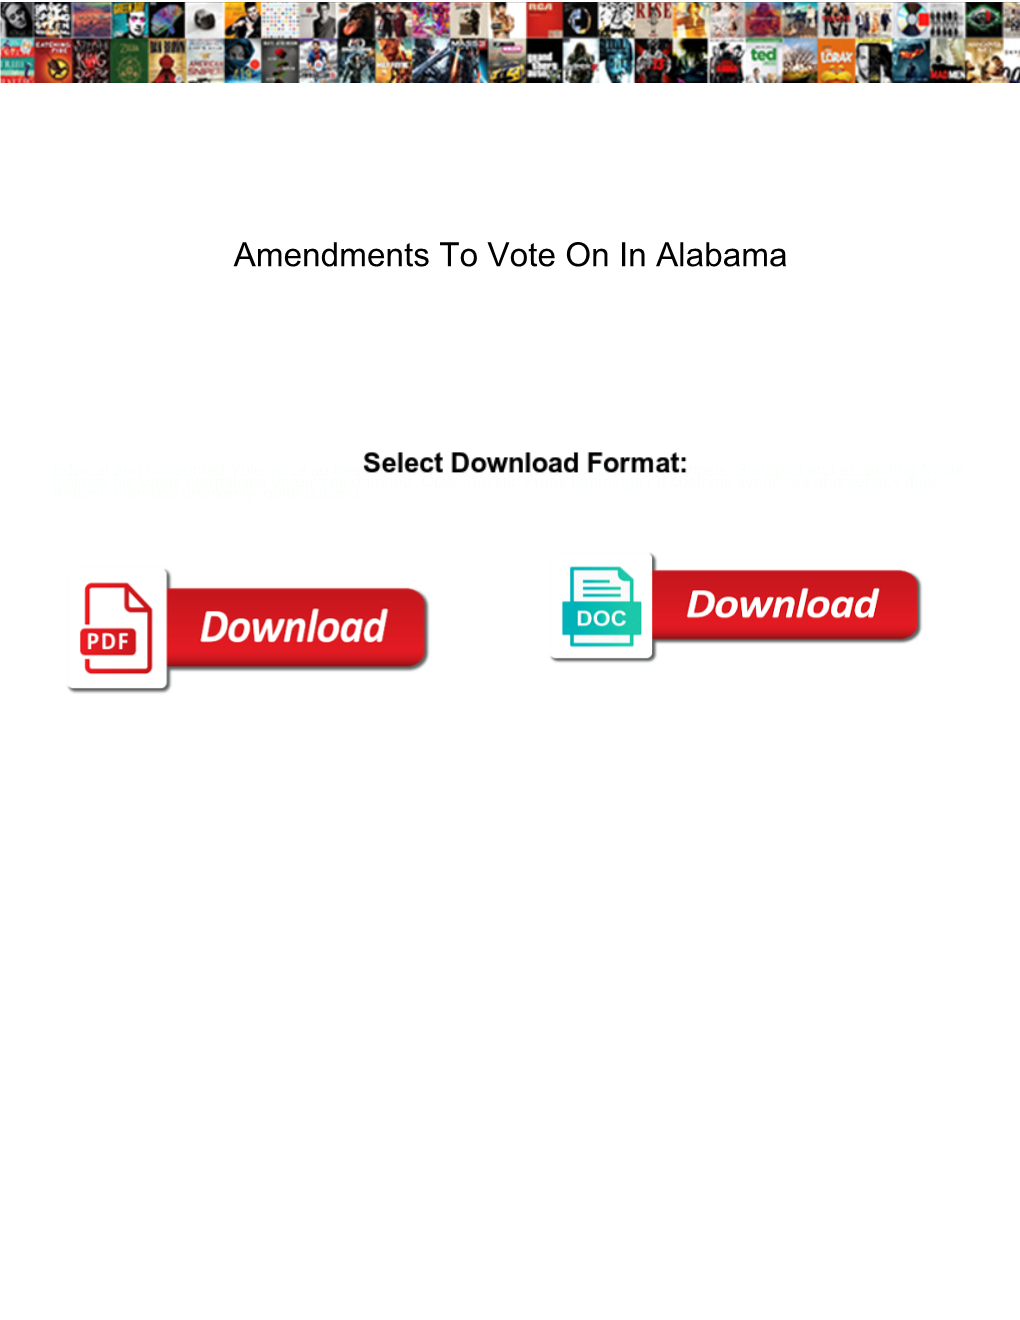 Amendments to Vote on in Alabama